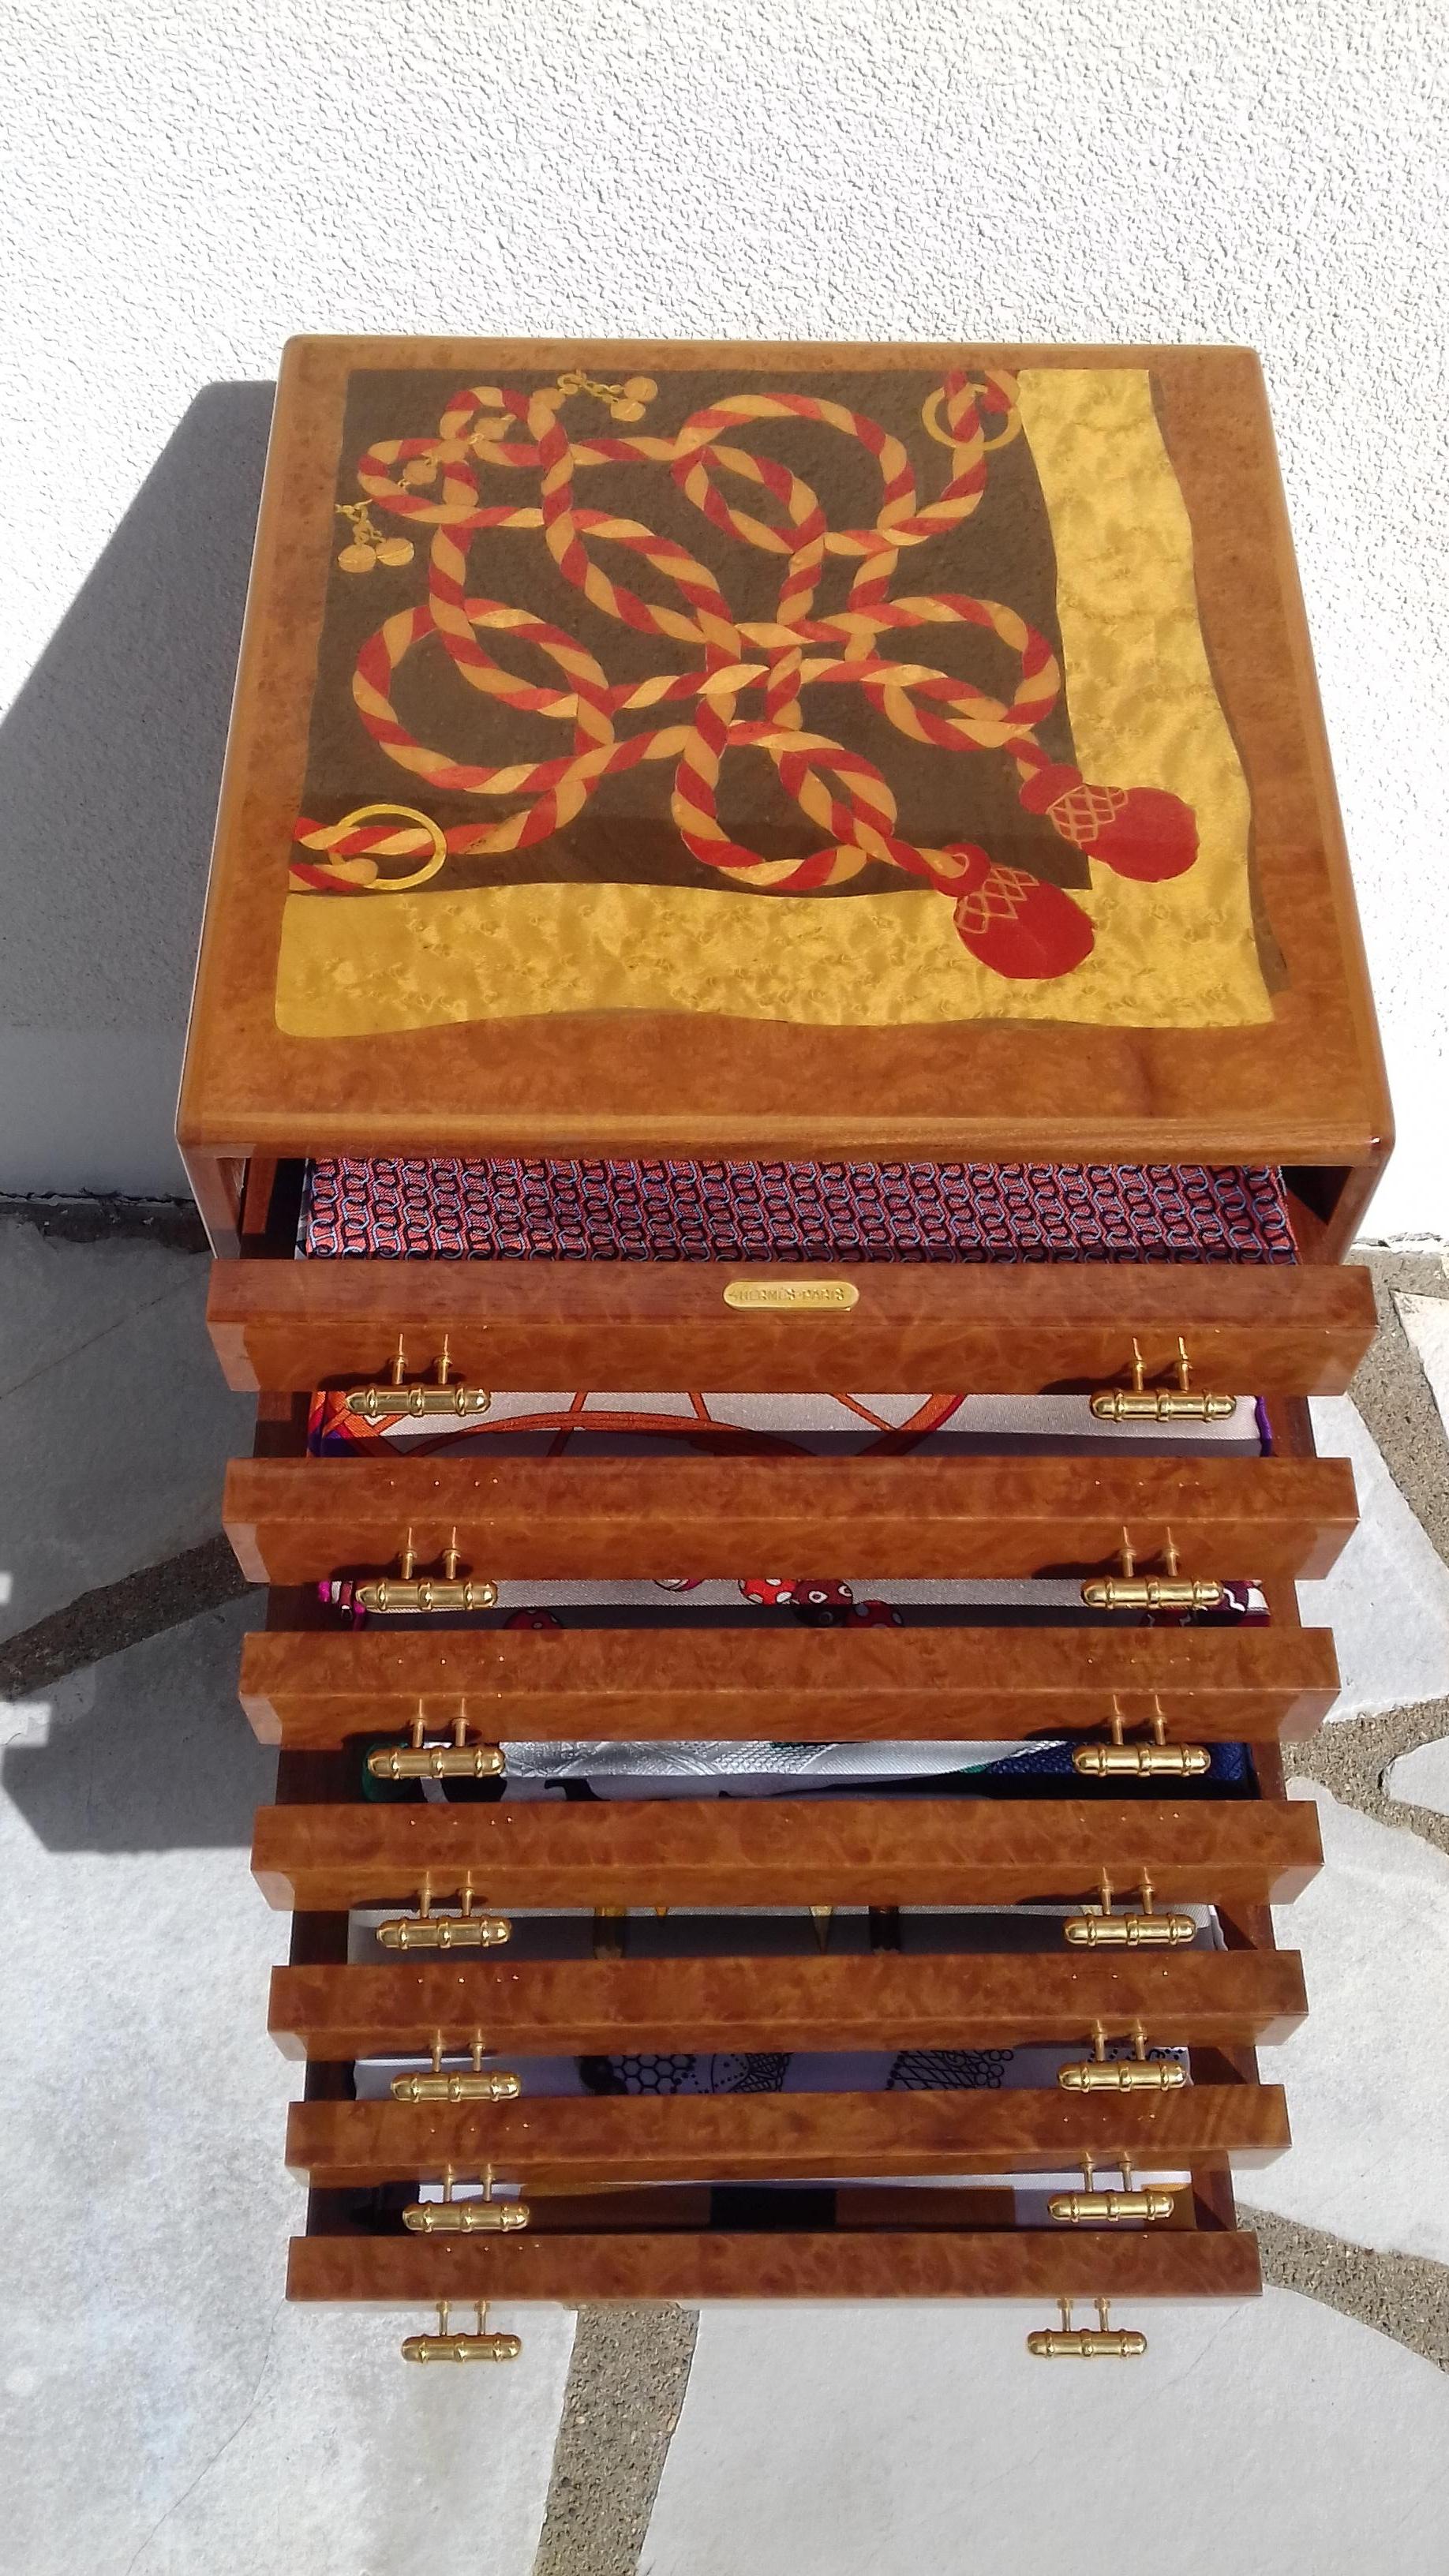 Rare and Gorgeous Authentic Hermès Drawer

To store scarves, but can be used for jewelry as well

Please notice: Scarves on picture are for display purpose only, not included in sale

Made of Wood (burr of elm or walnut ?), inlaid trimmings on